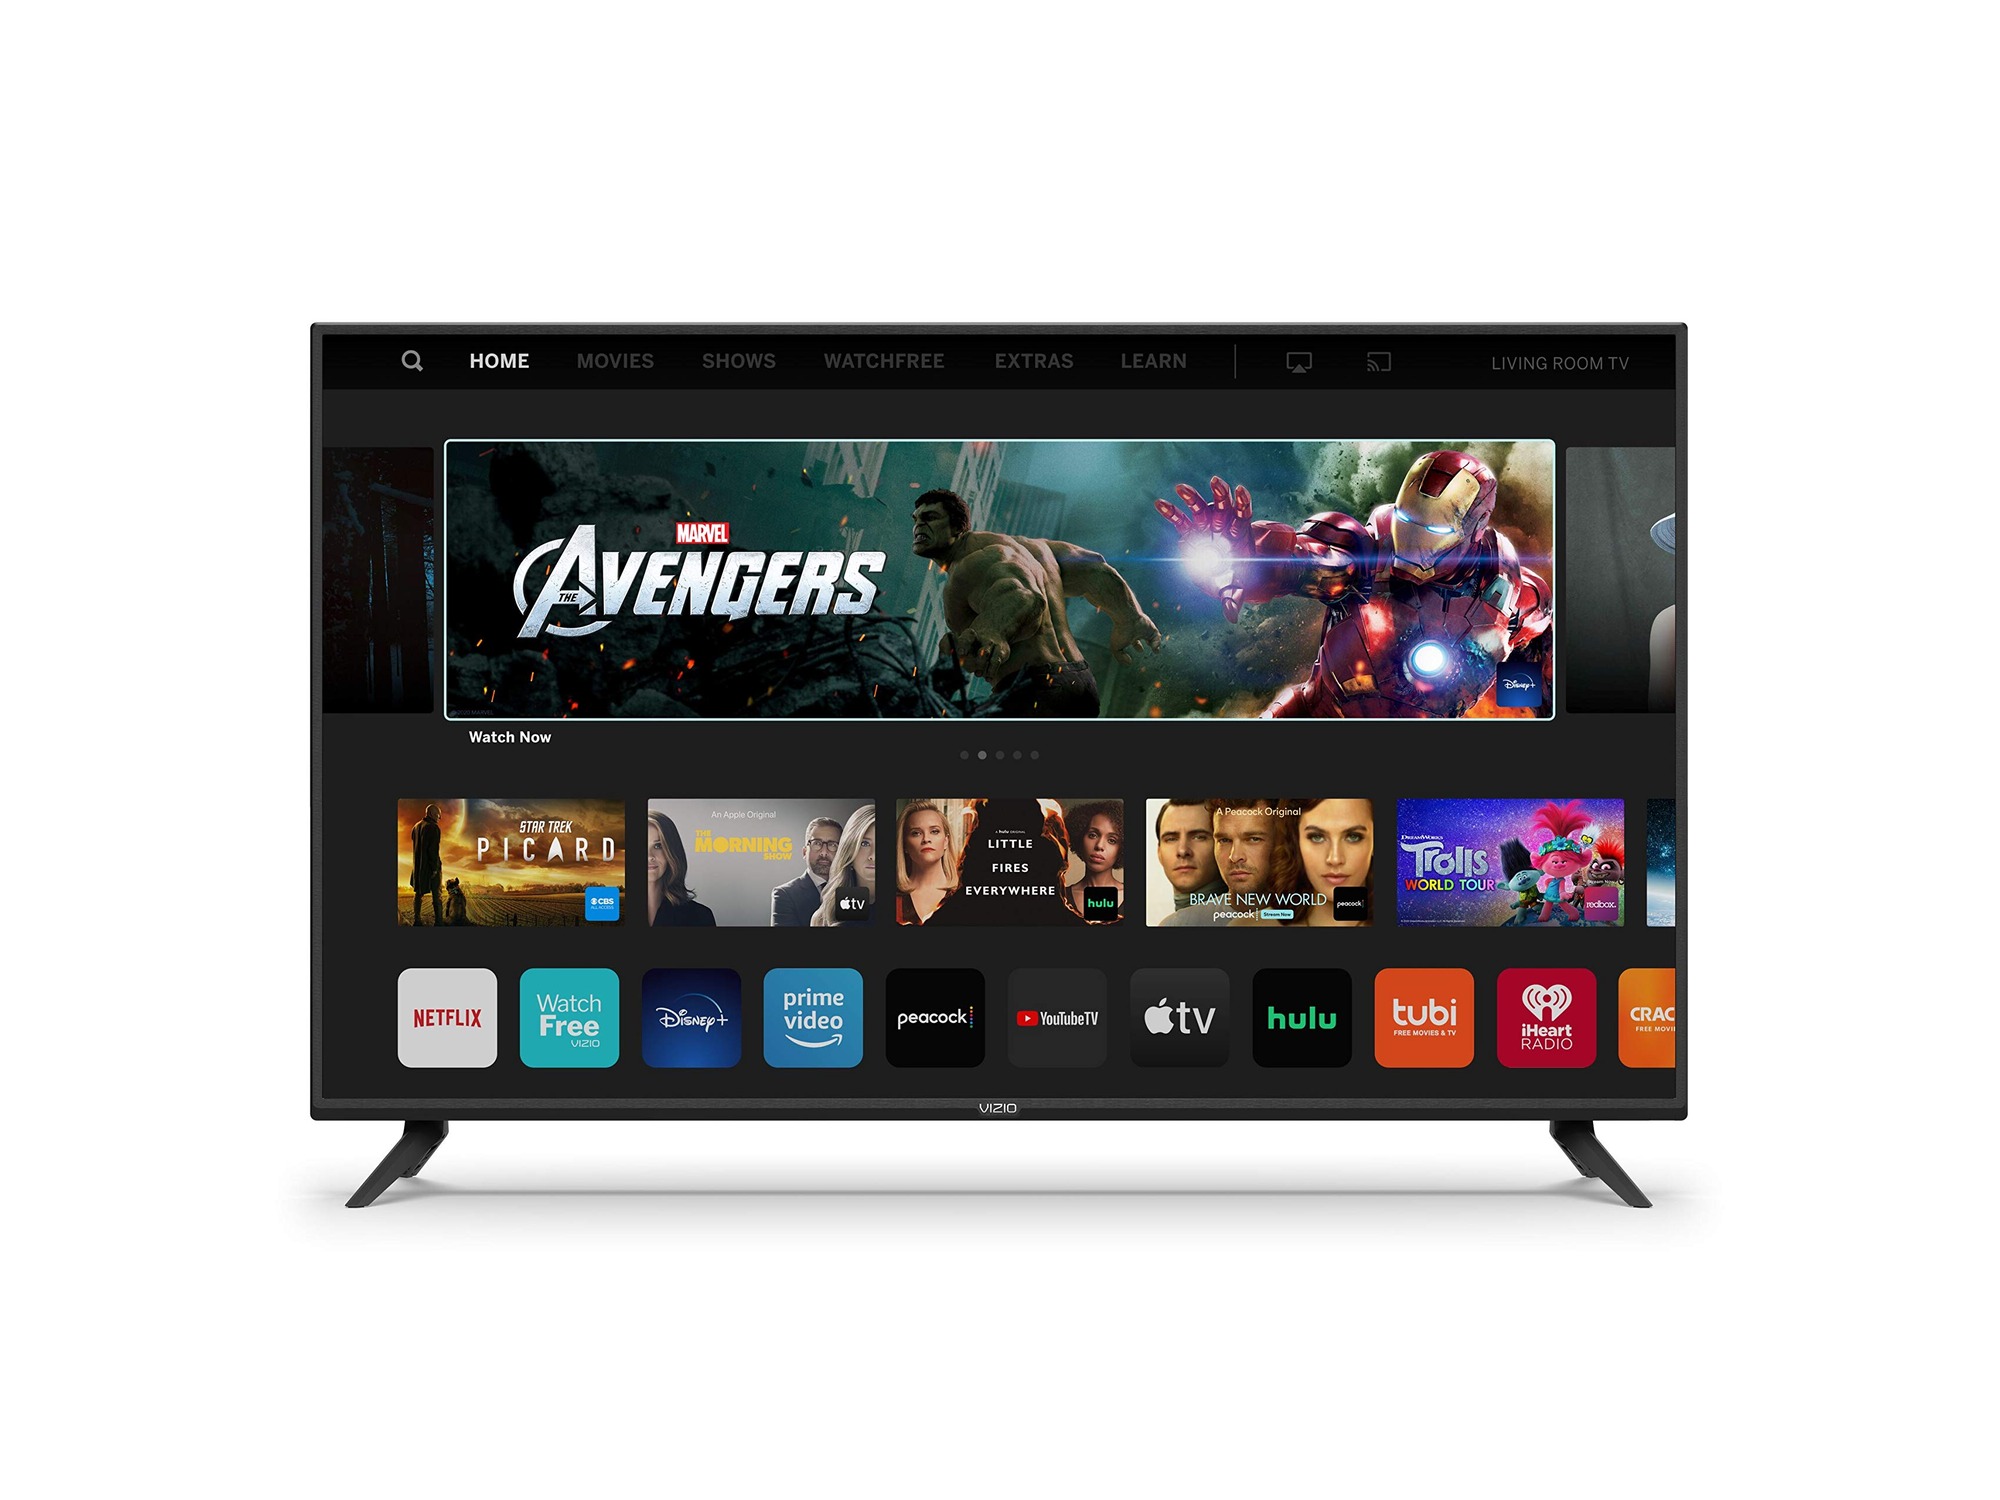 How To Use Your Vizio Smart TV Without The Remote